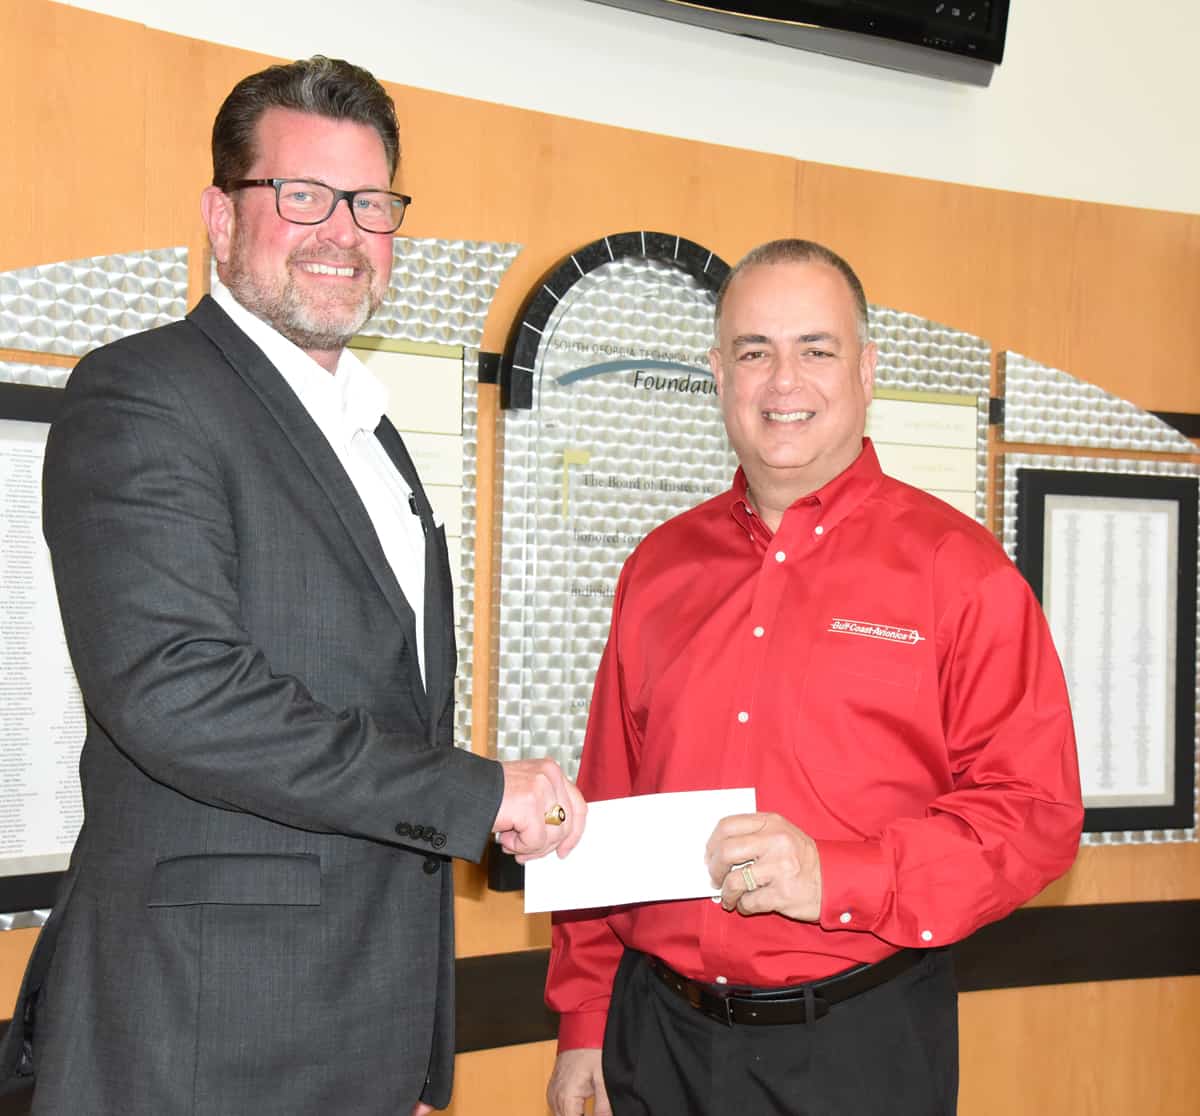 Rick Garcia, President/CEO of Gulf Coast Avionics Corporation in Lakeland, FL, is shown above (on the right) presenting a check for the new endowed scholarships at South Georgia Technical College to President Dr. John Watford (shown on left).